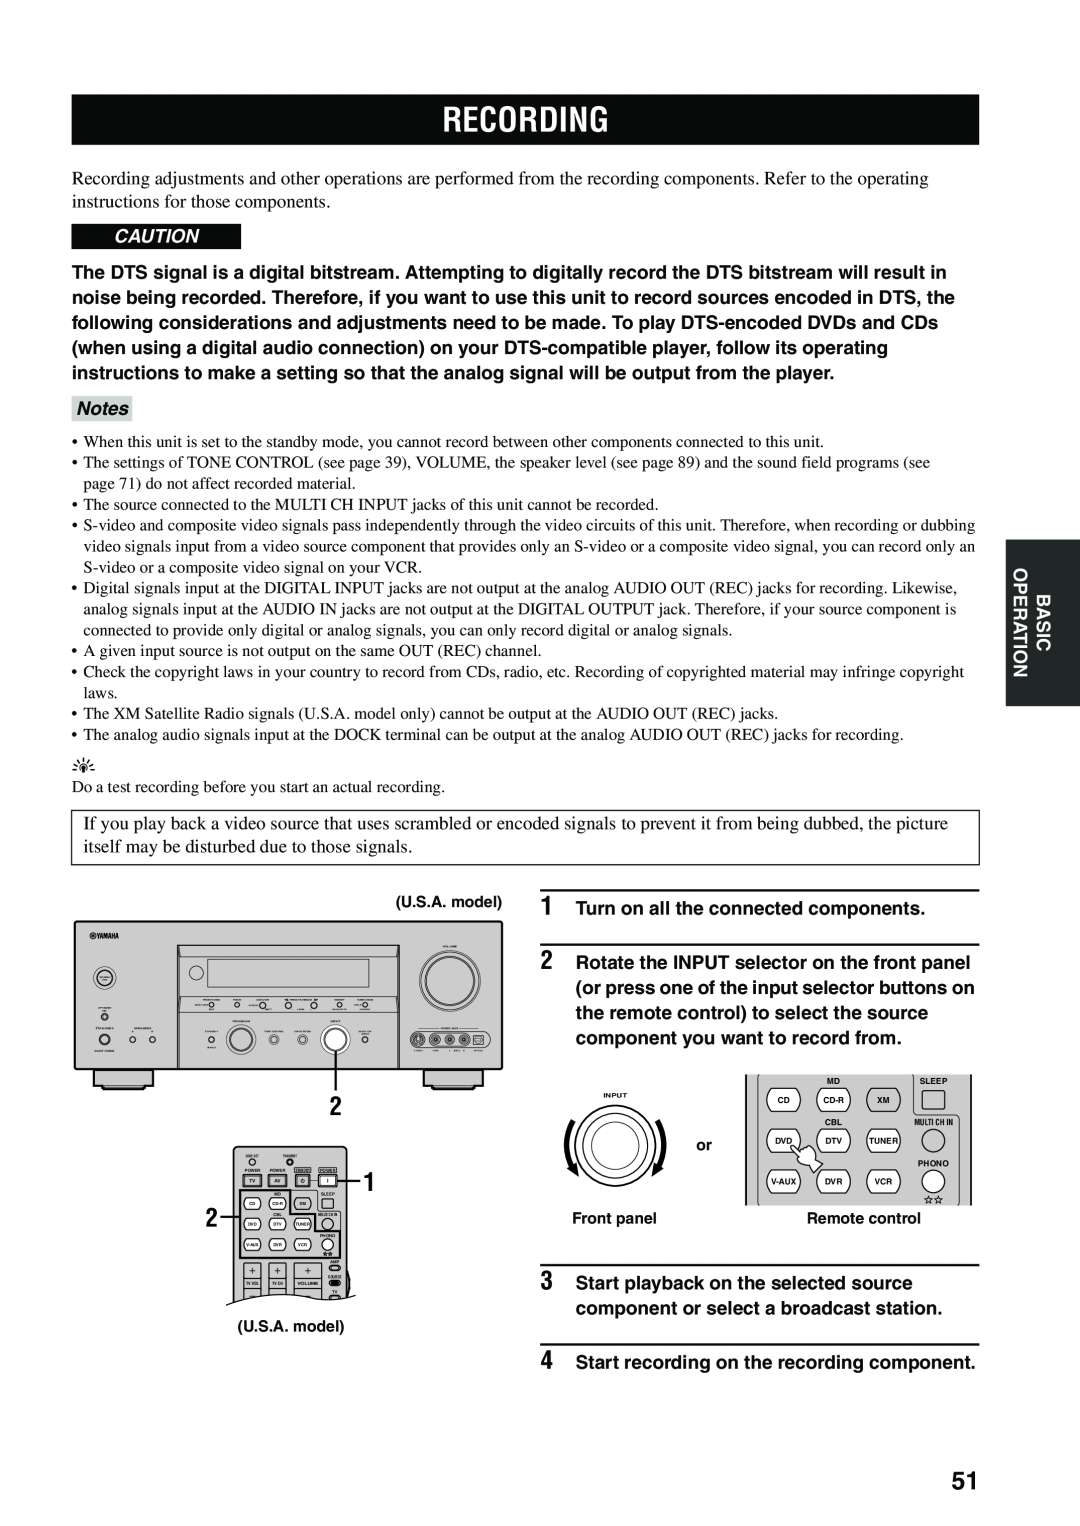 Yamaha HTR-5960 owner manual Recording, Turn on all the connected components, component you want to record from, Notes 